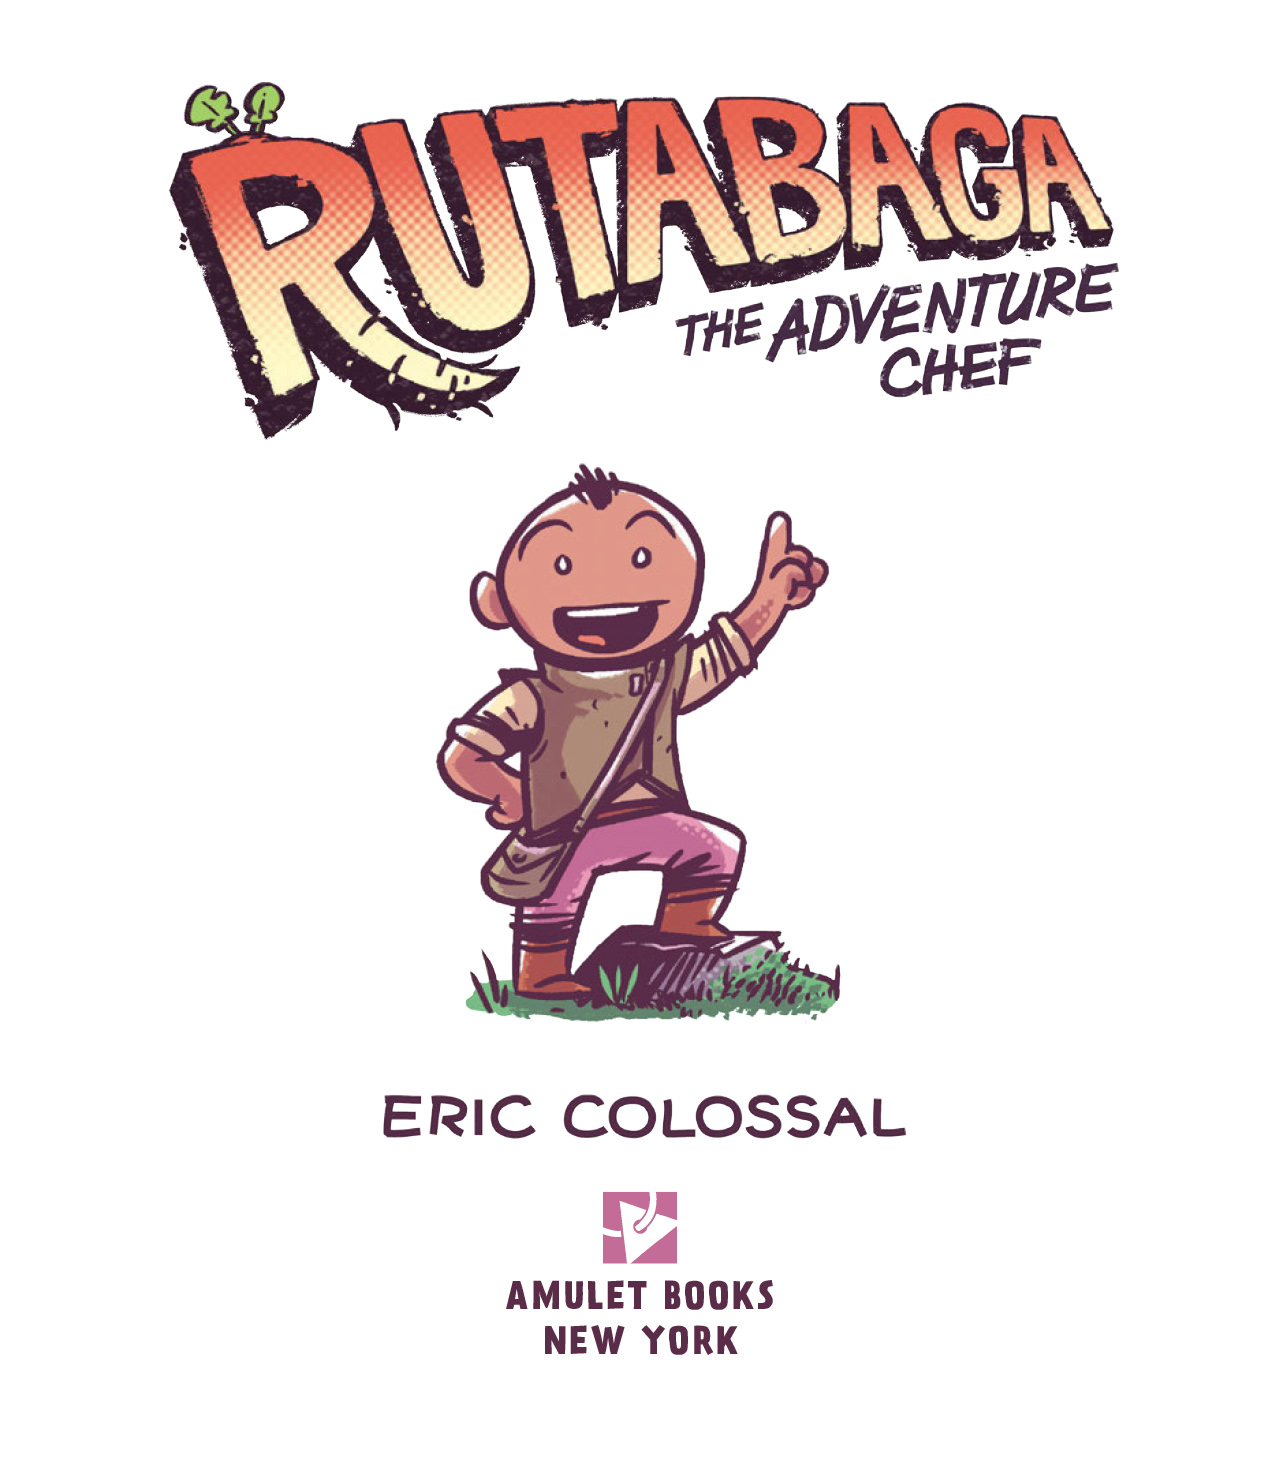 Read online Rutabaga: The Adventure Chef comic -  Issue # TPB 1 - 3